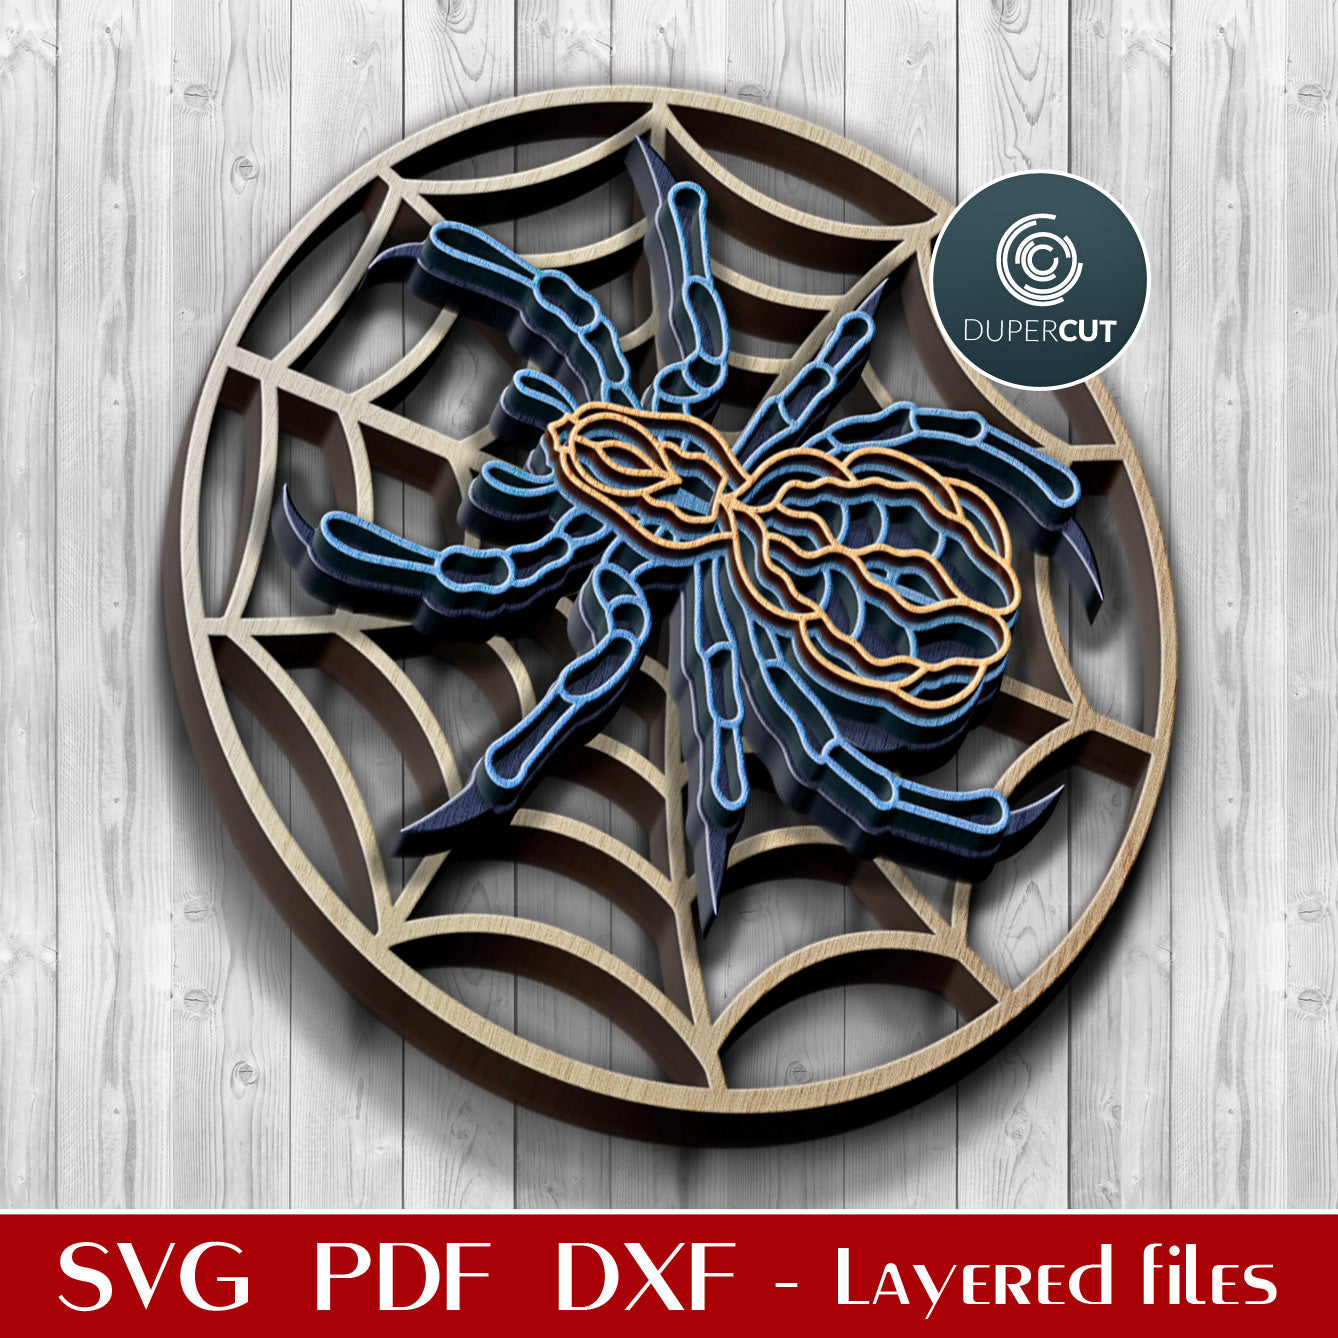 Spider - multi-layer cut files - SVG PDF DXF vector template for Glowforge, Cricut, Silhouette Cameo, laser cutting machines